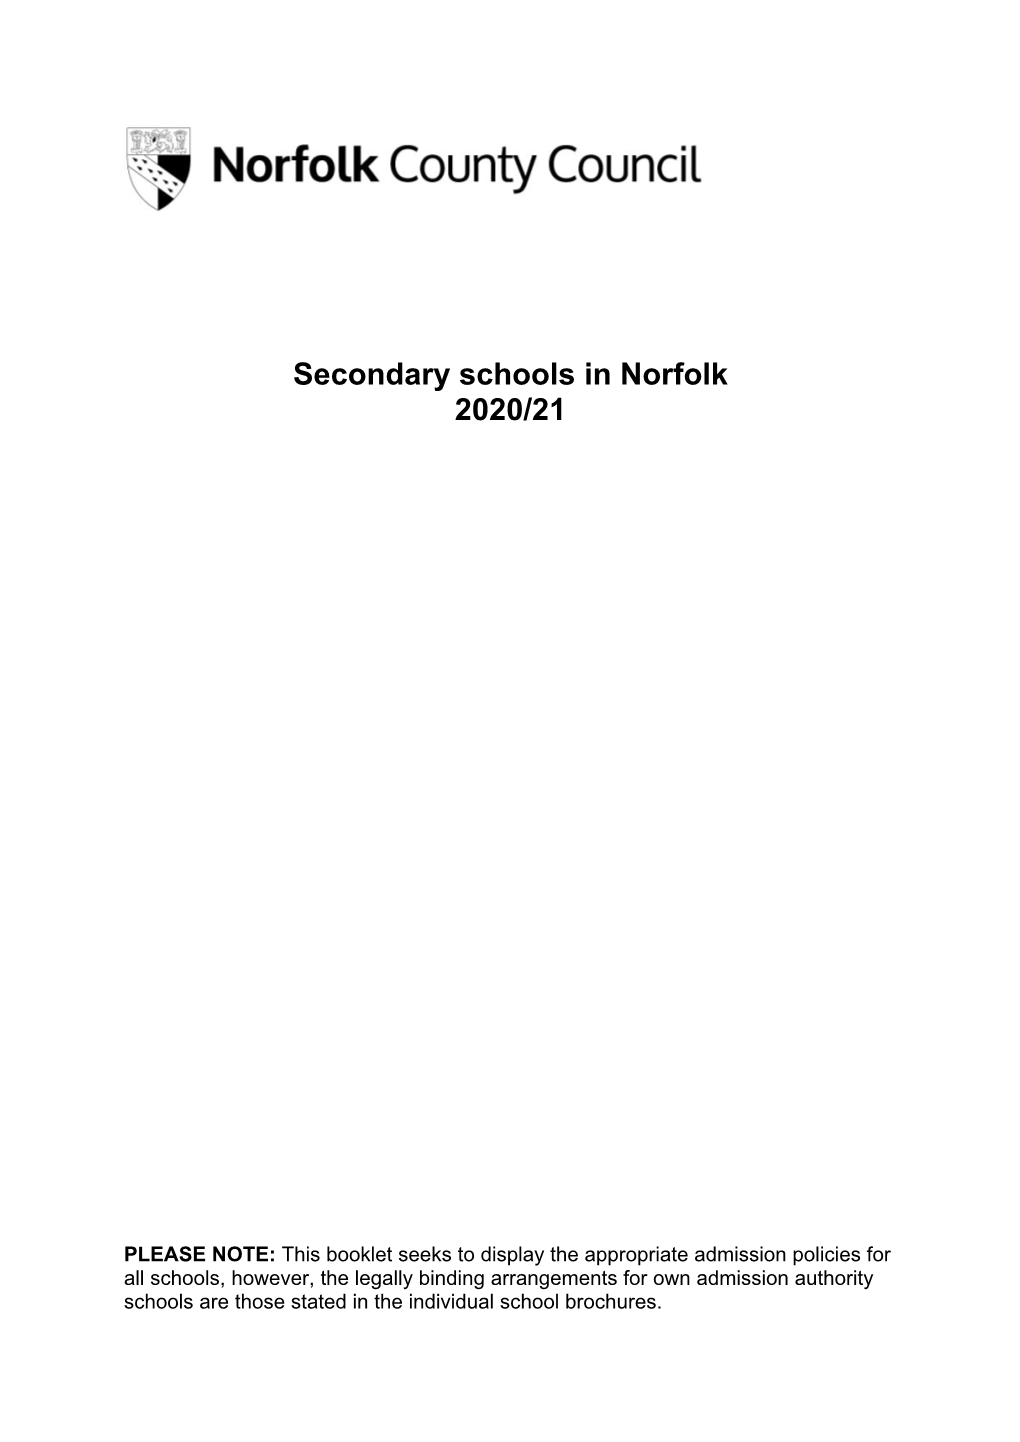 Detailed Guide to Secondary Schools in Norfolk 2020/21